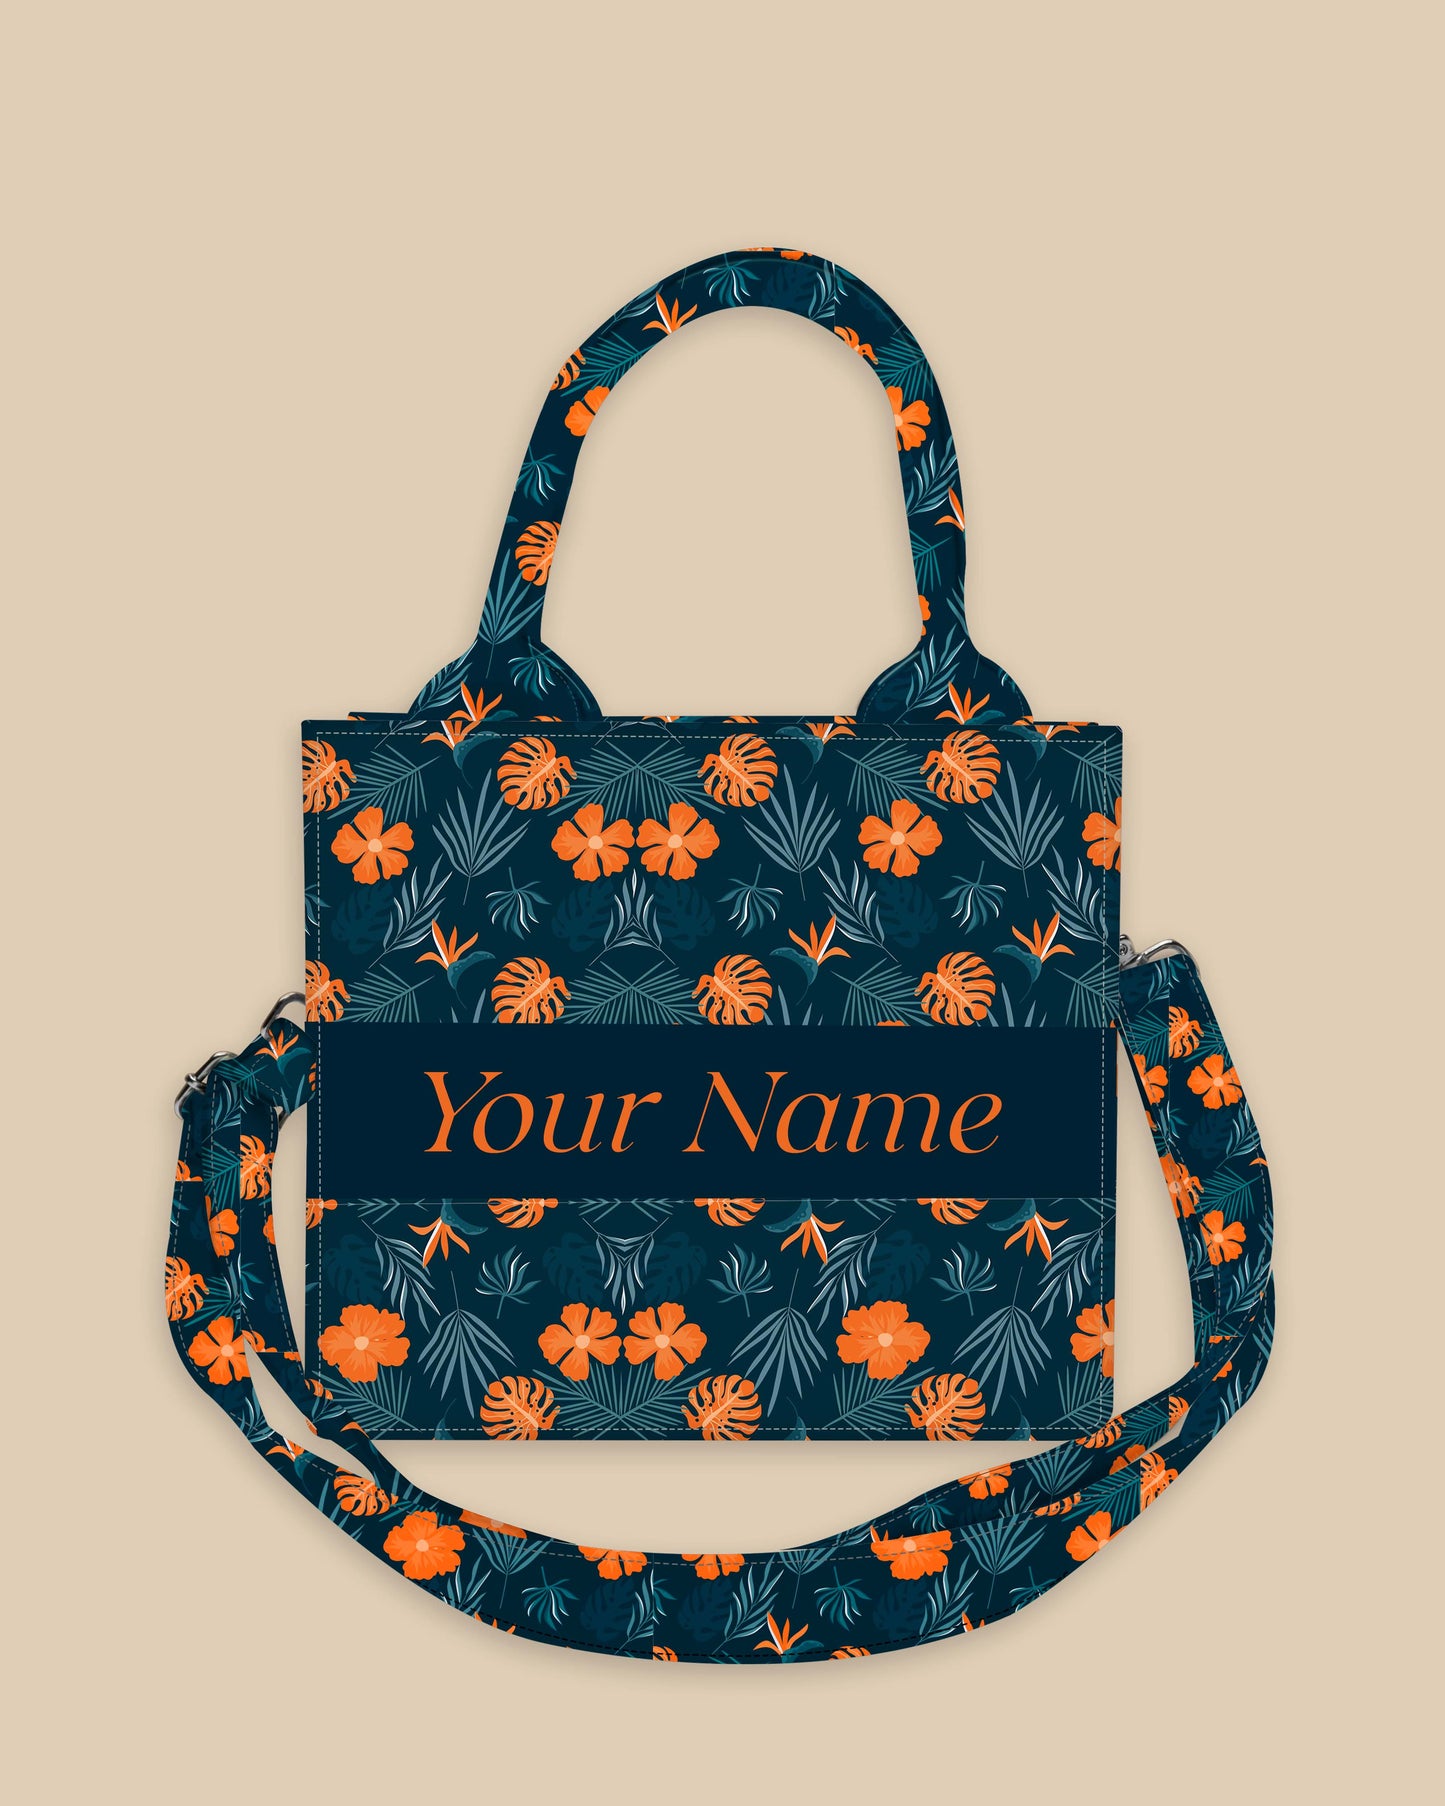 Customized Small Tote Bag Designed With Summer Flowers And Tropical Leaves